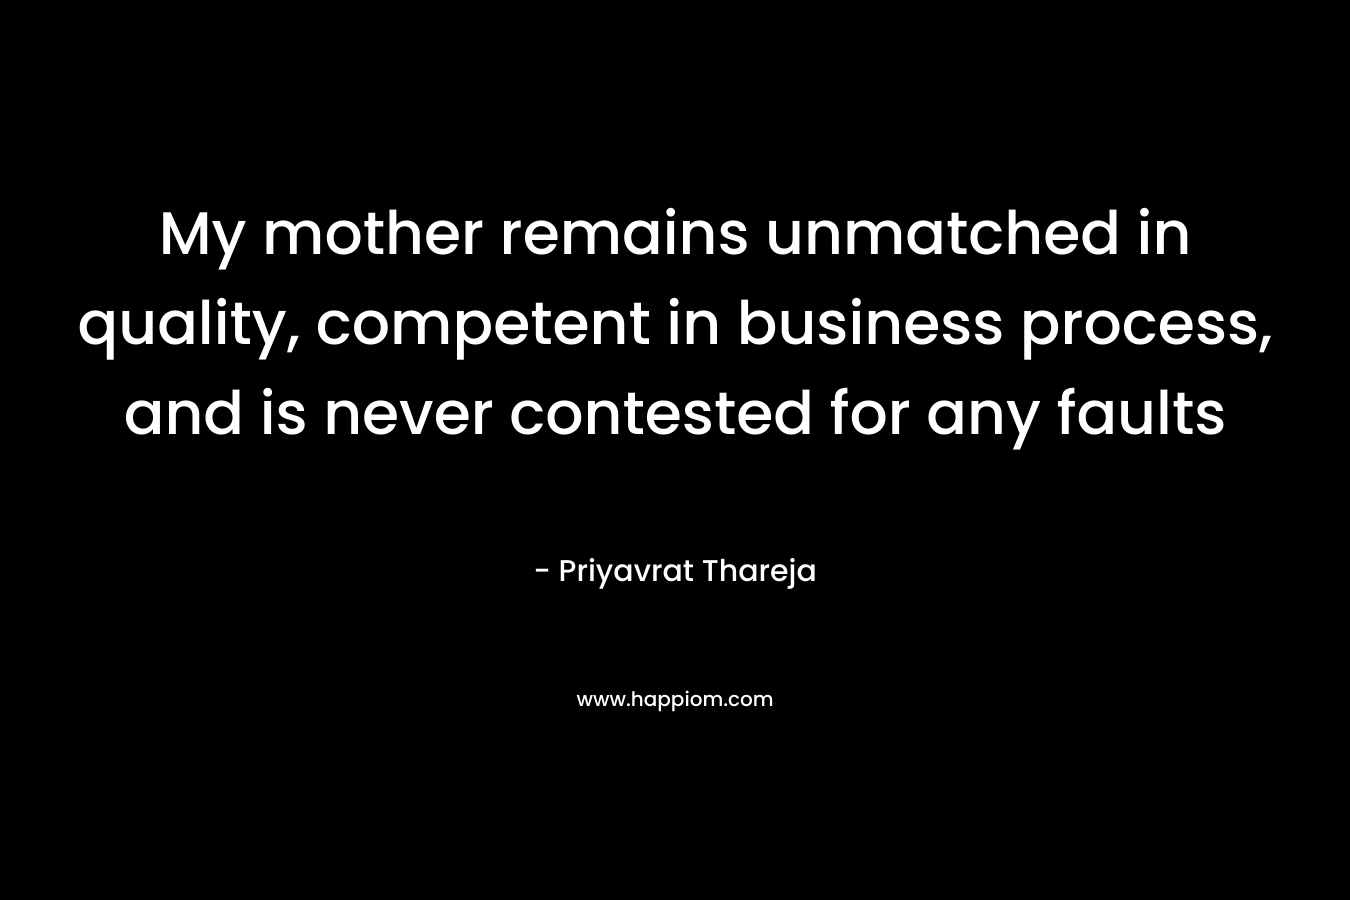 My mother remains unmatched in quality, competent in business process, and is never contested for any faults – Priyavrat Thareja